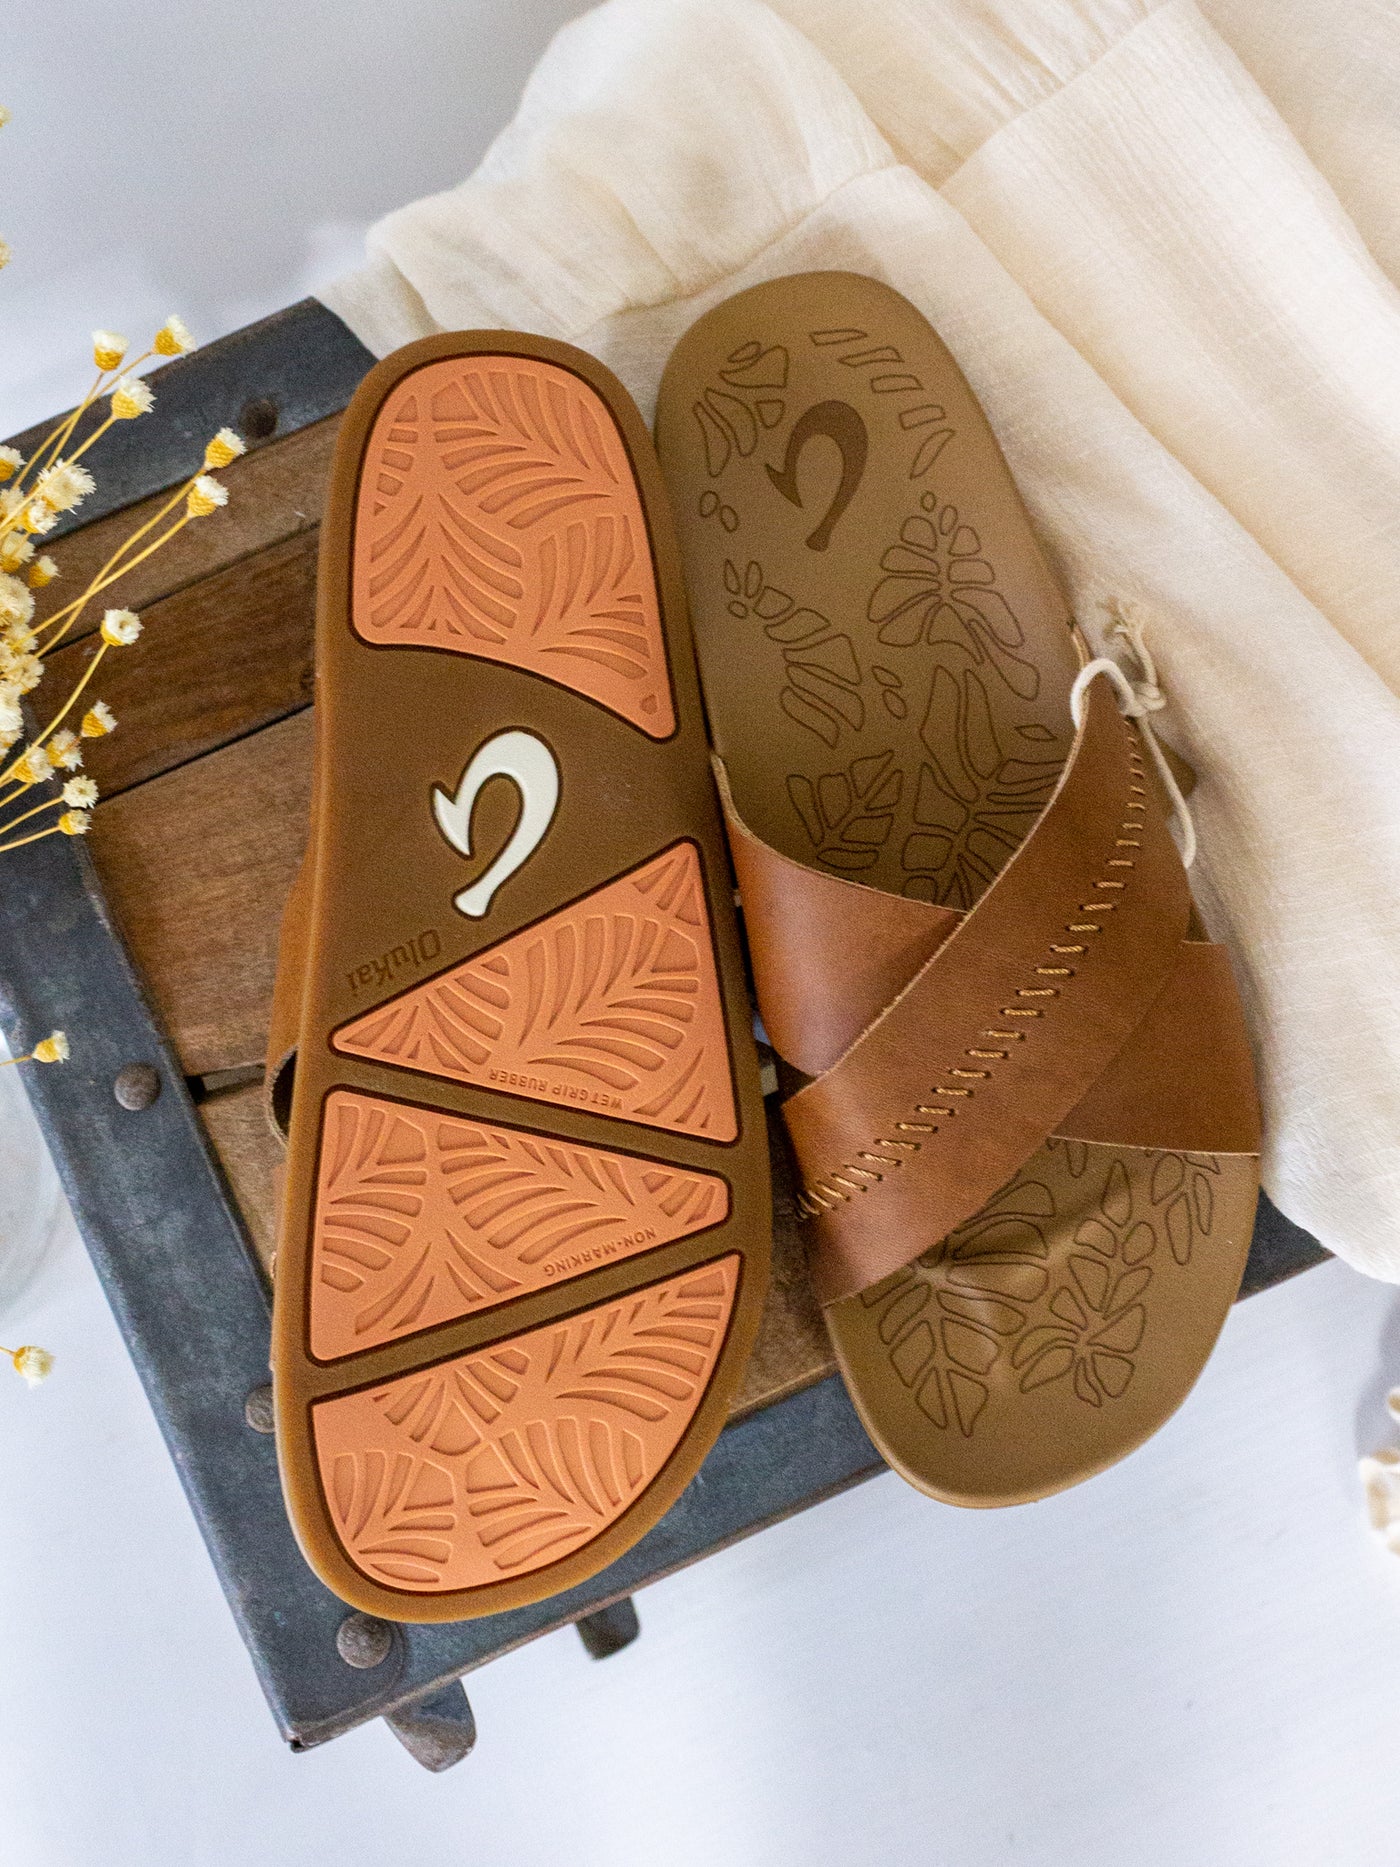 A brown leather slide style sandal that has two crossover straps and stitching detail on the top one.